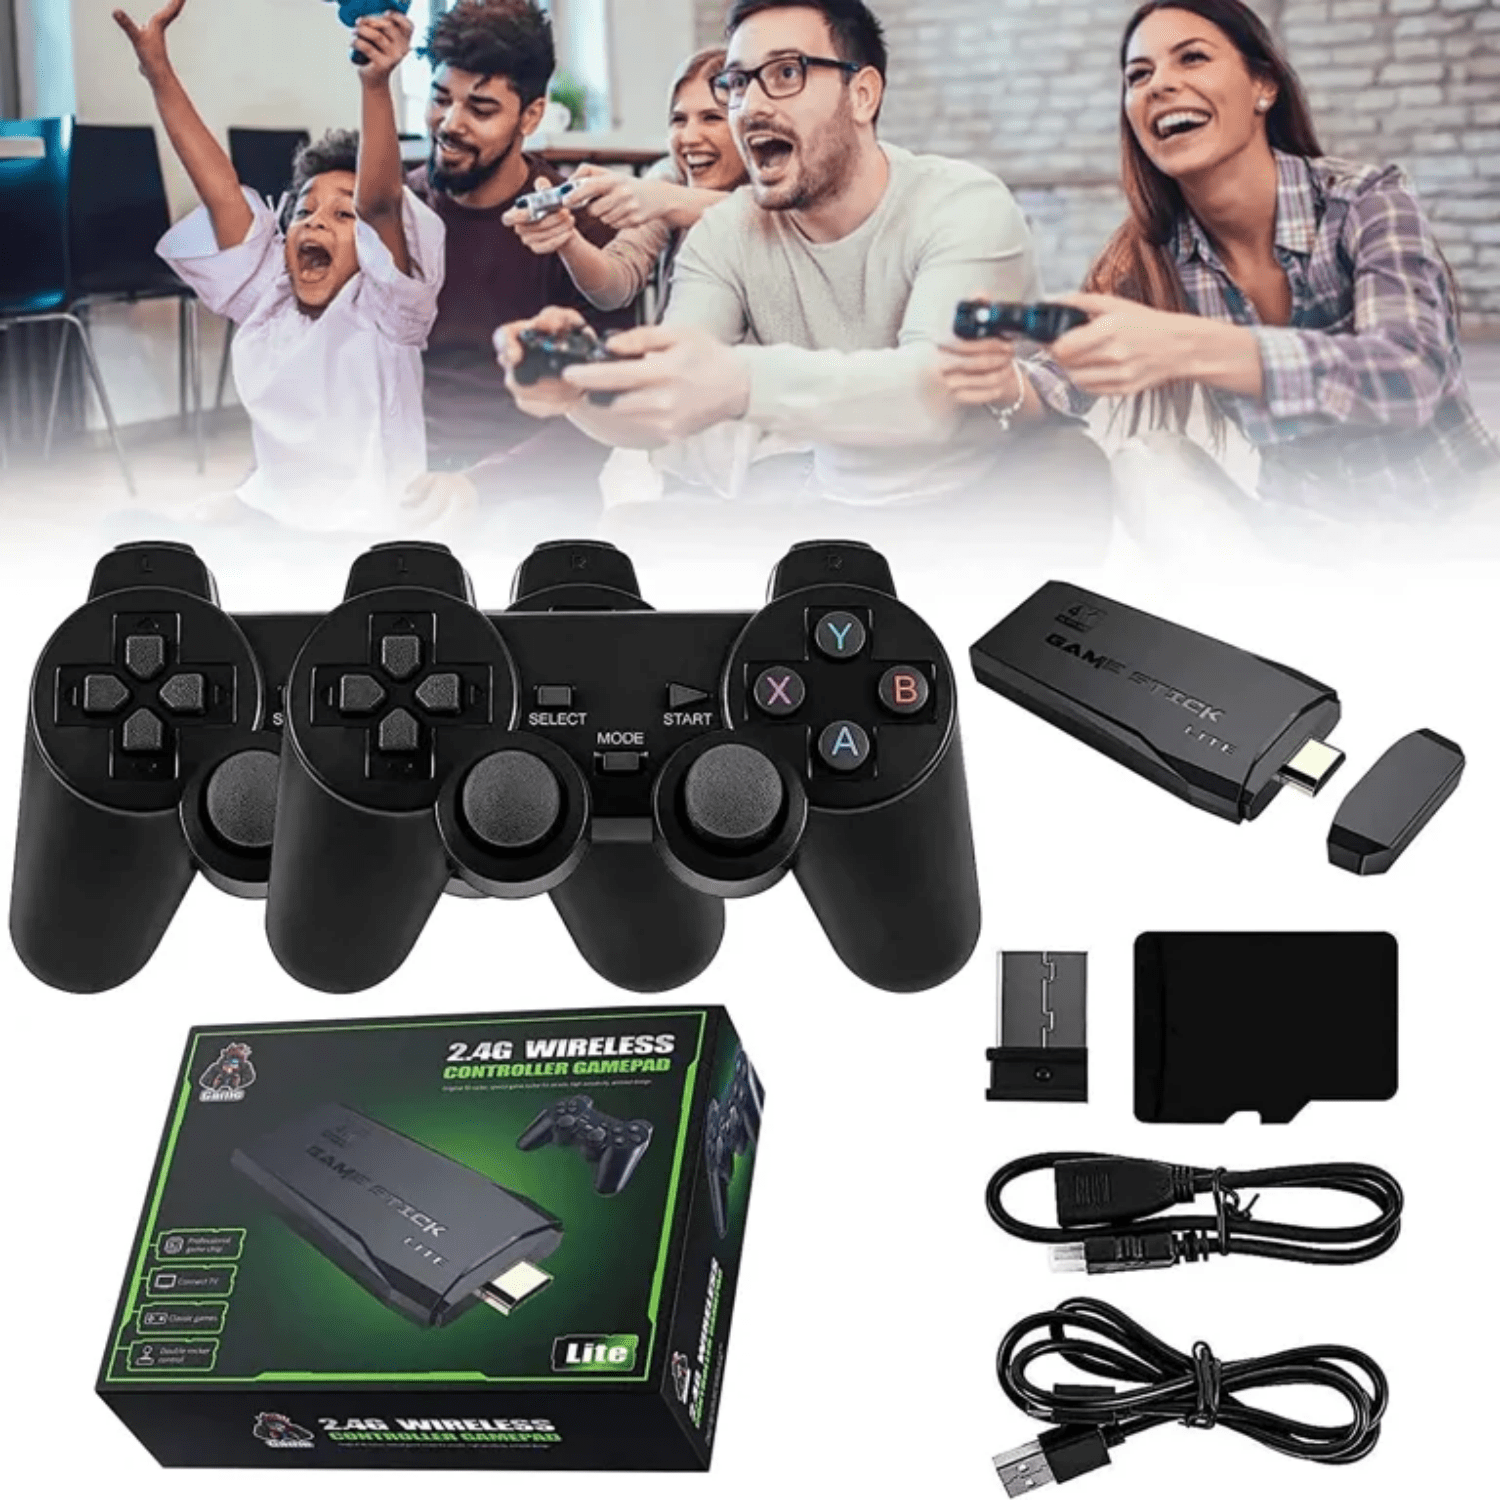 HD TV Game Consoles 4GB Video Game Console player Support HDMI TV